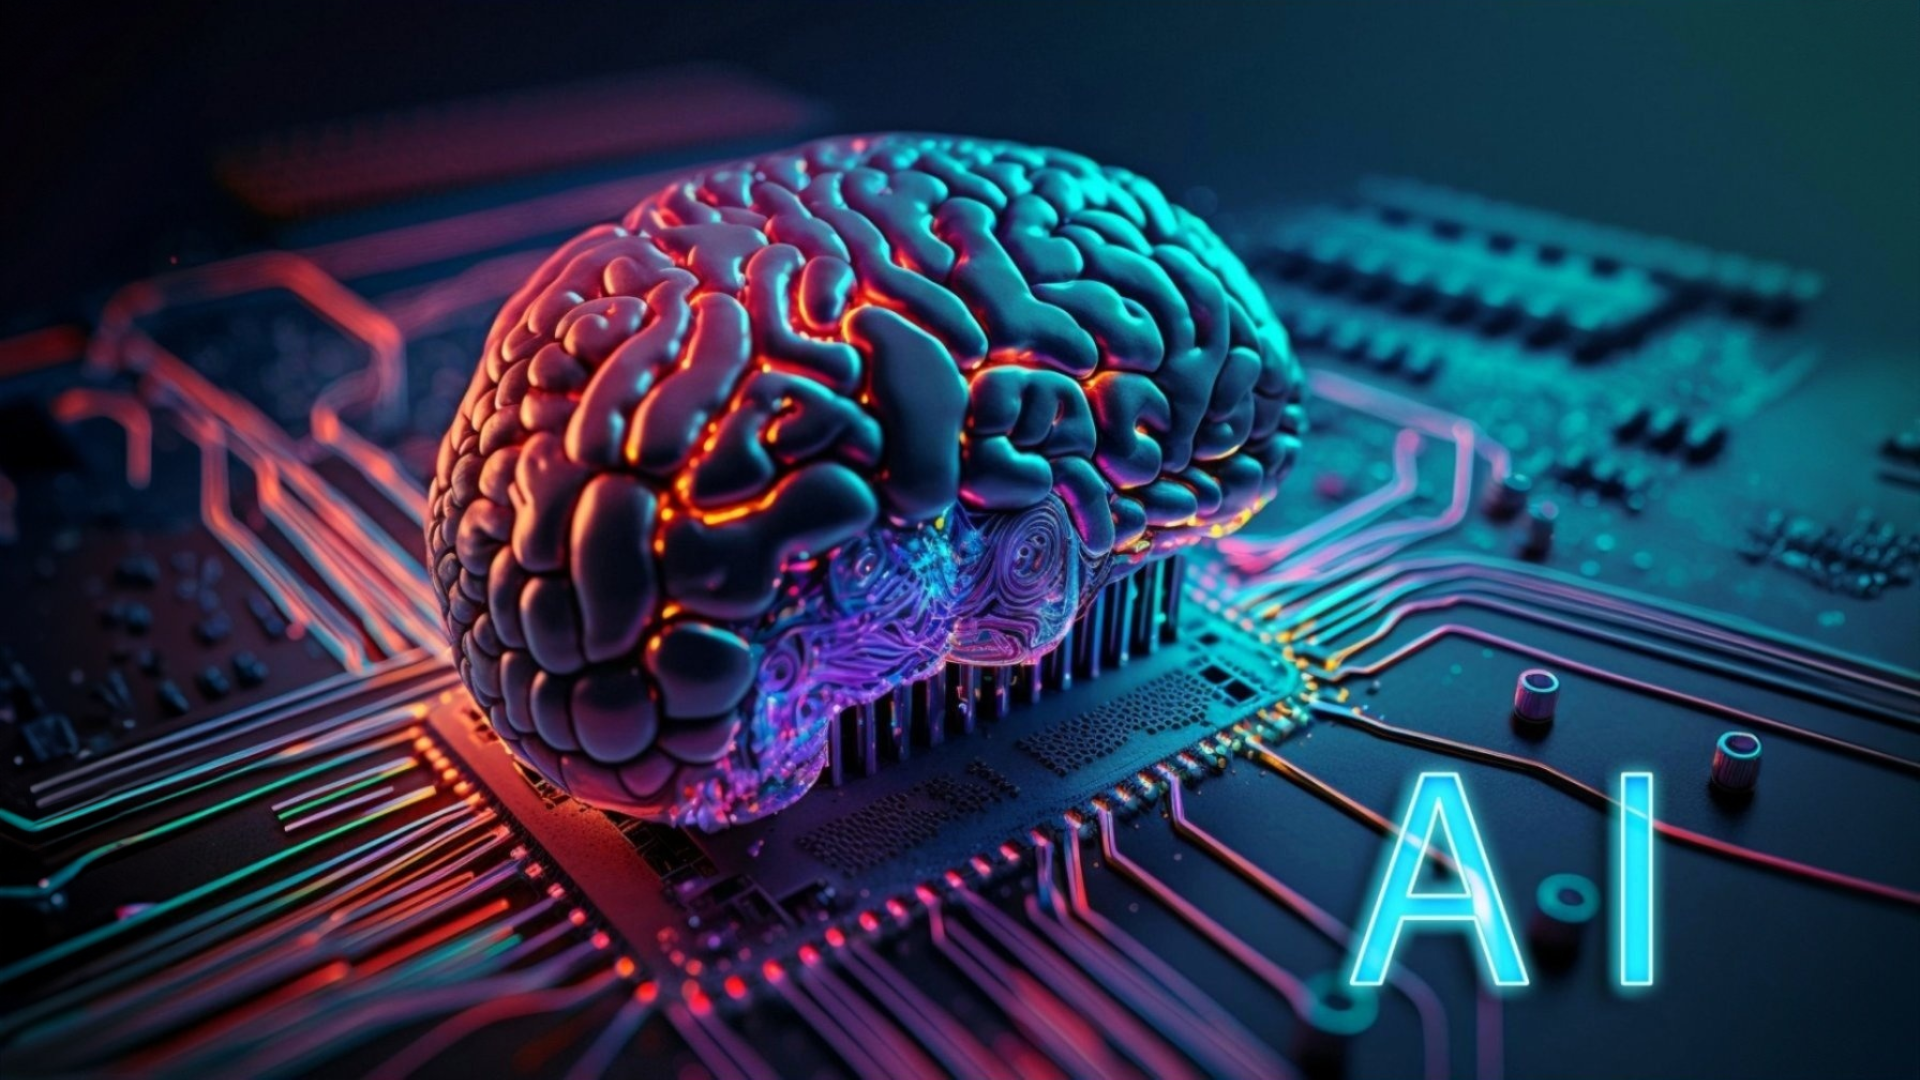 Artificial intelligence, Neural networks, Machine learning models, AI systems,